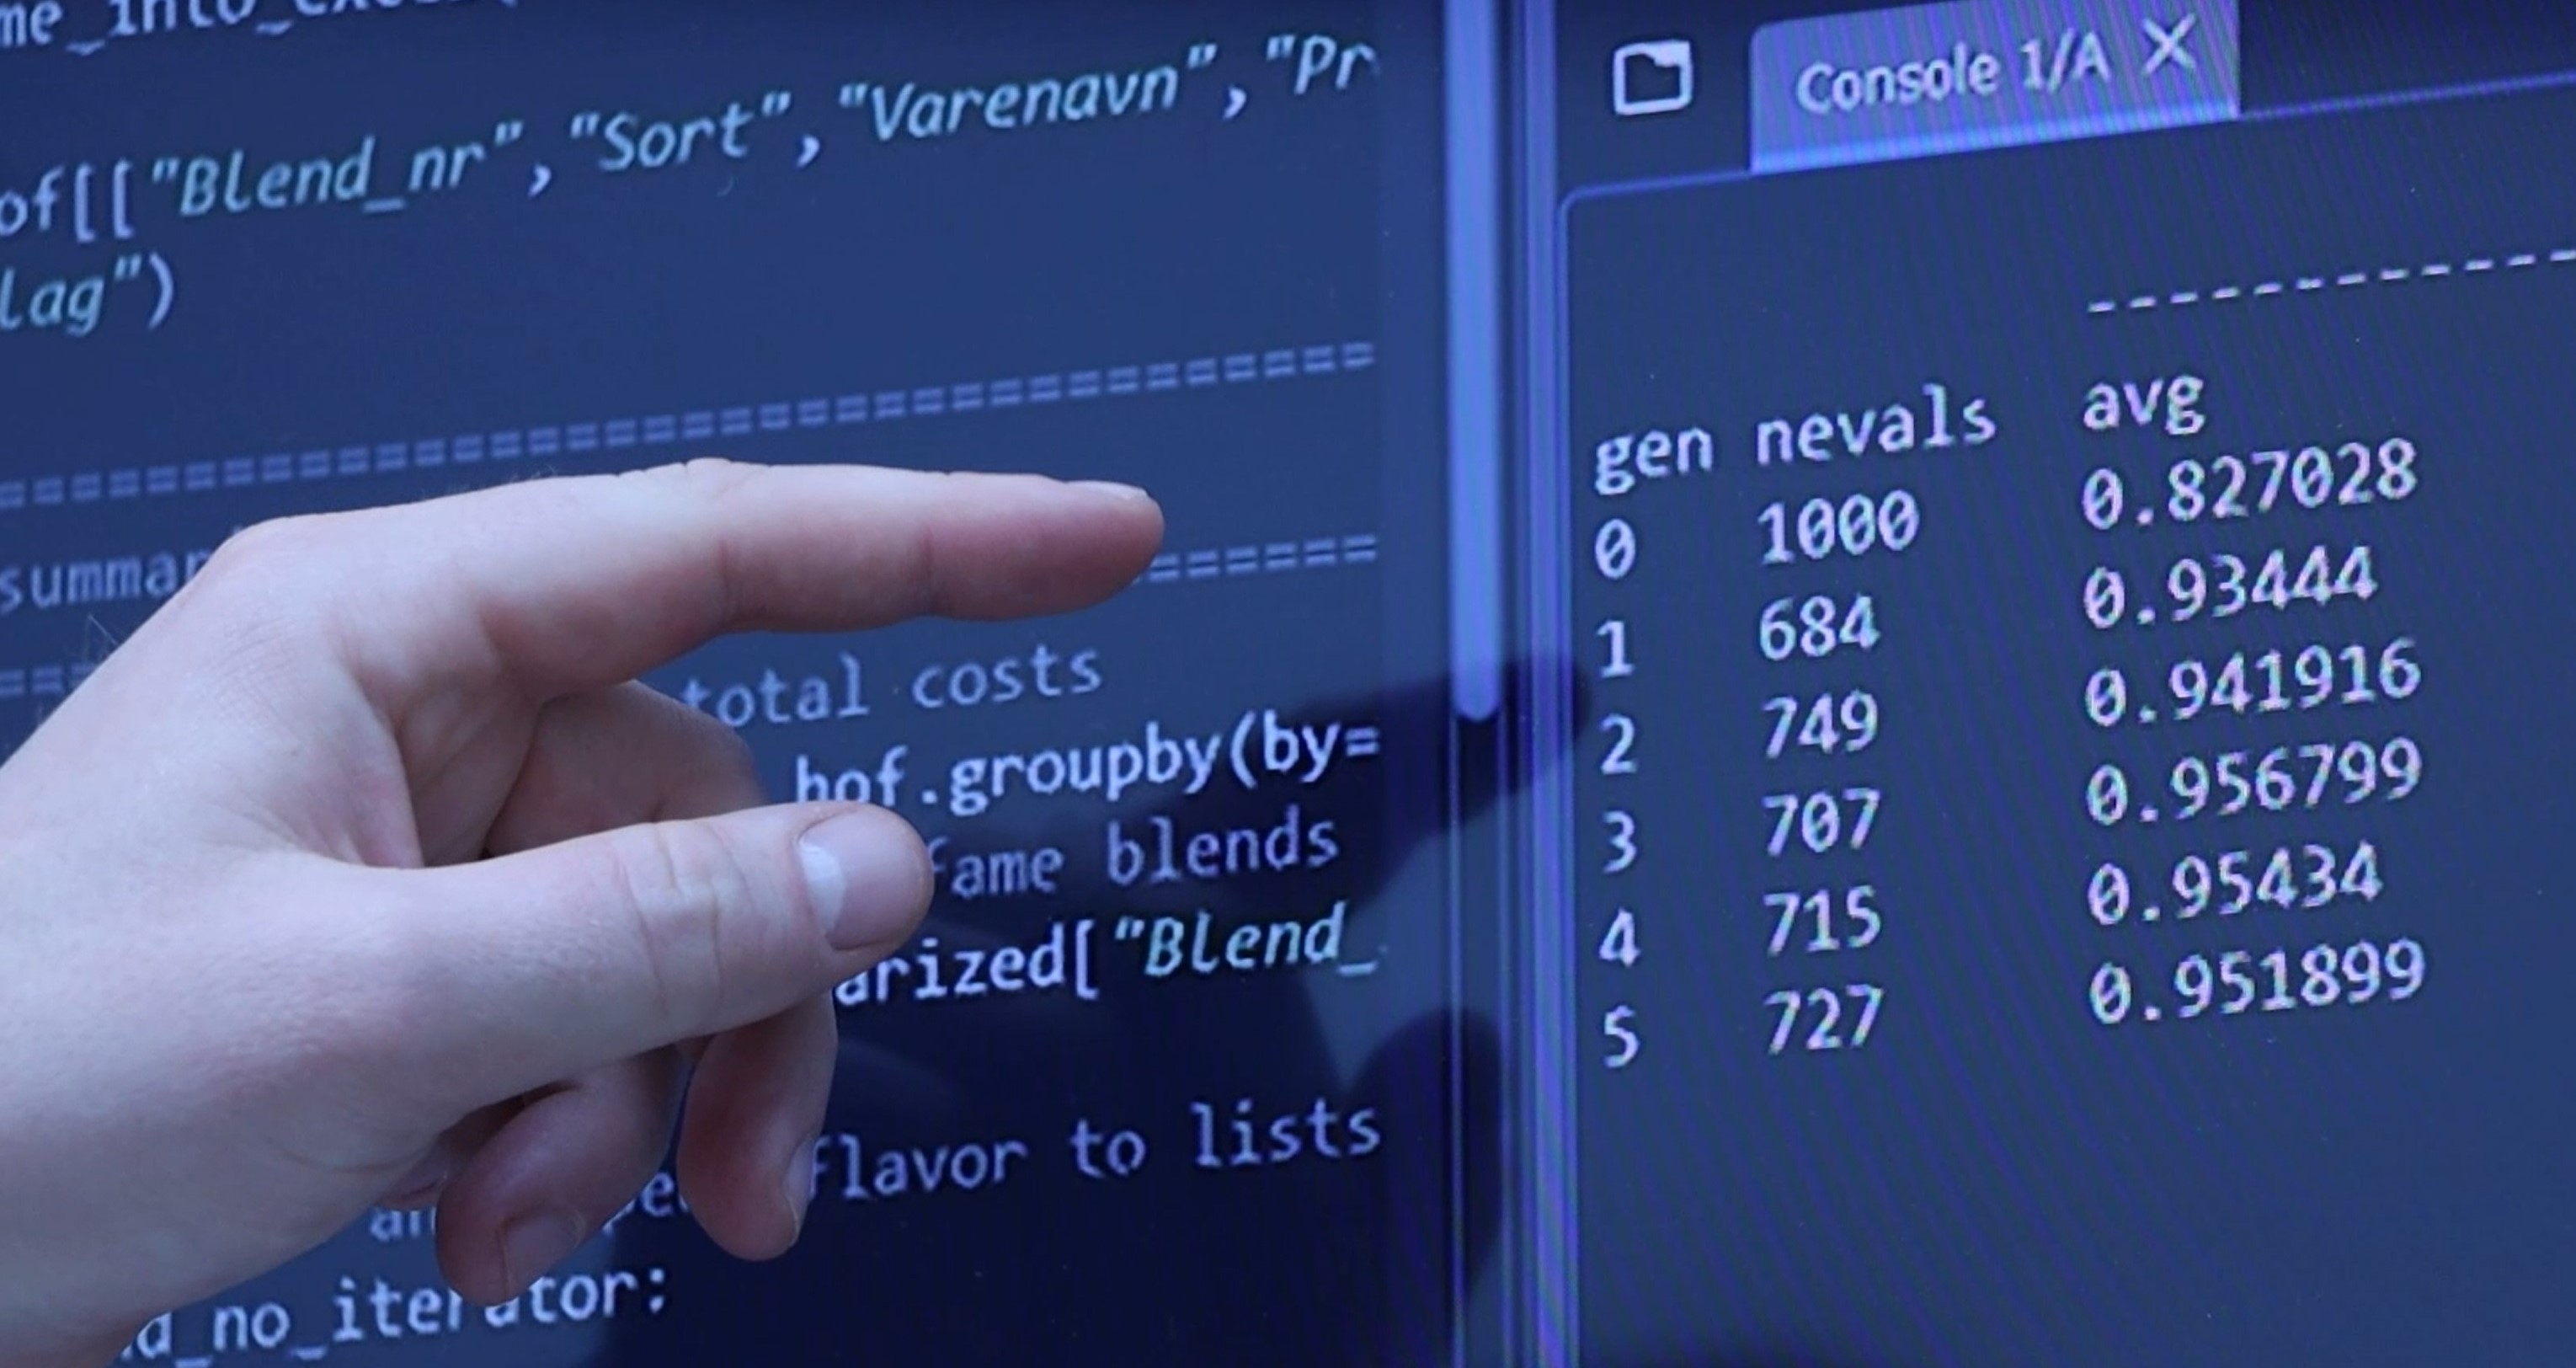 Index finger of a left hand points to lines of code on a screen